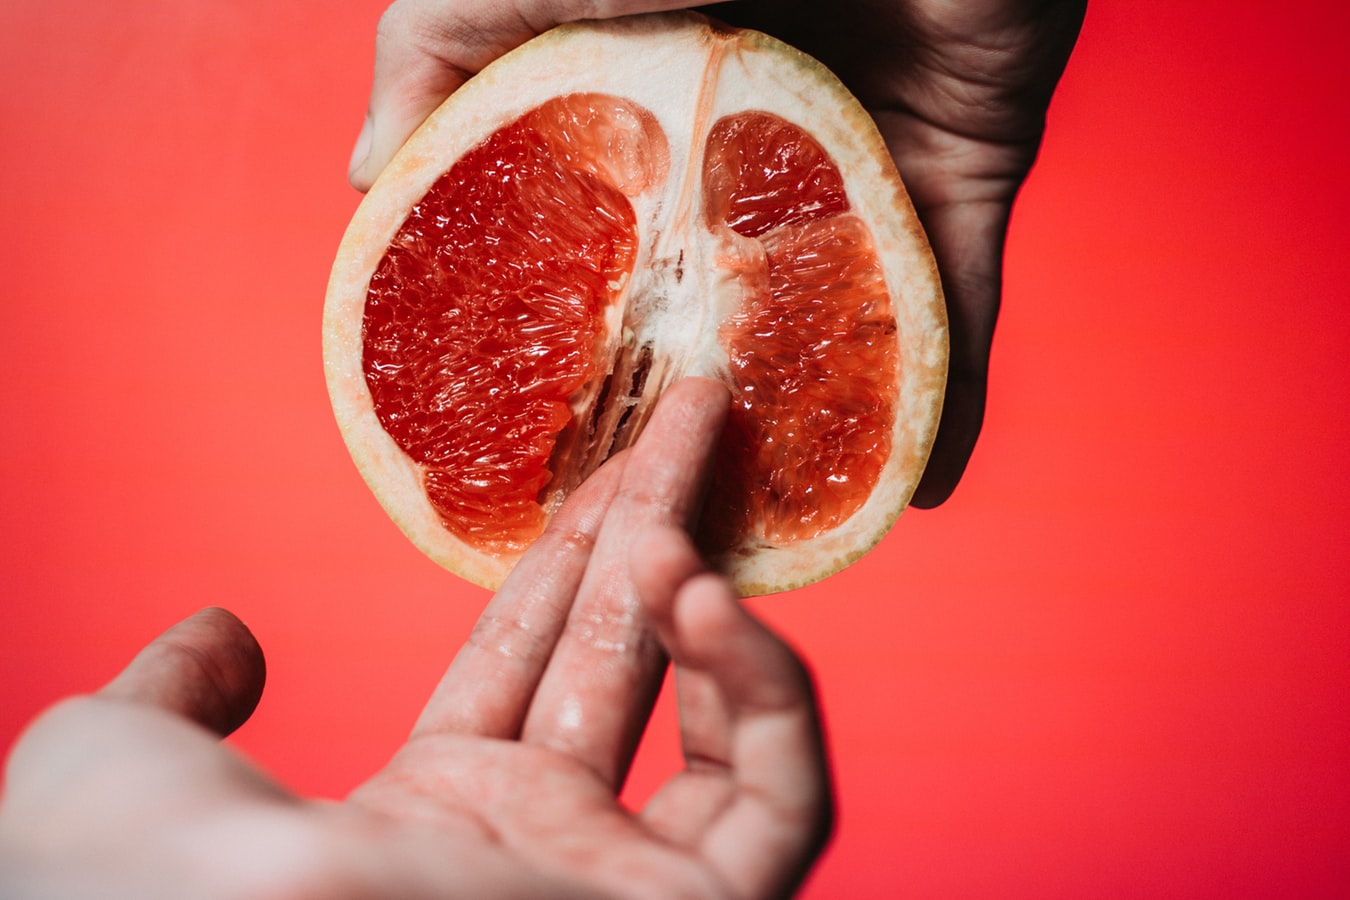 One hand holding half of a grapefruit, while another hand touches the grapefruit.